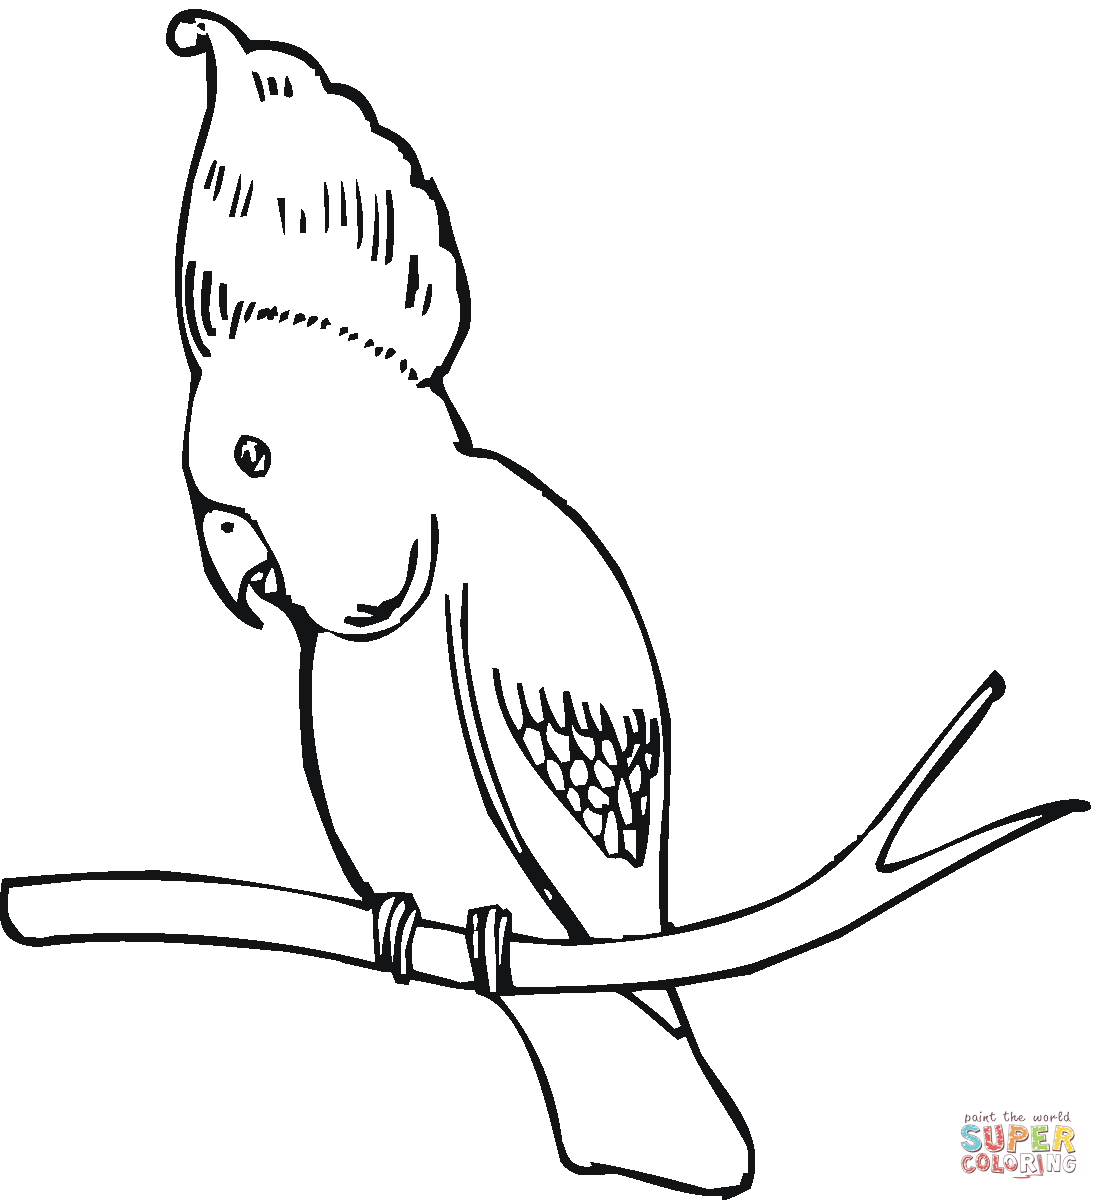 Palm Cockatoo coloring #10, Download drawings